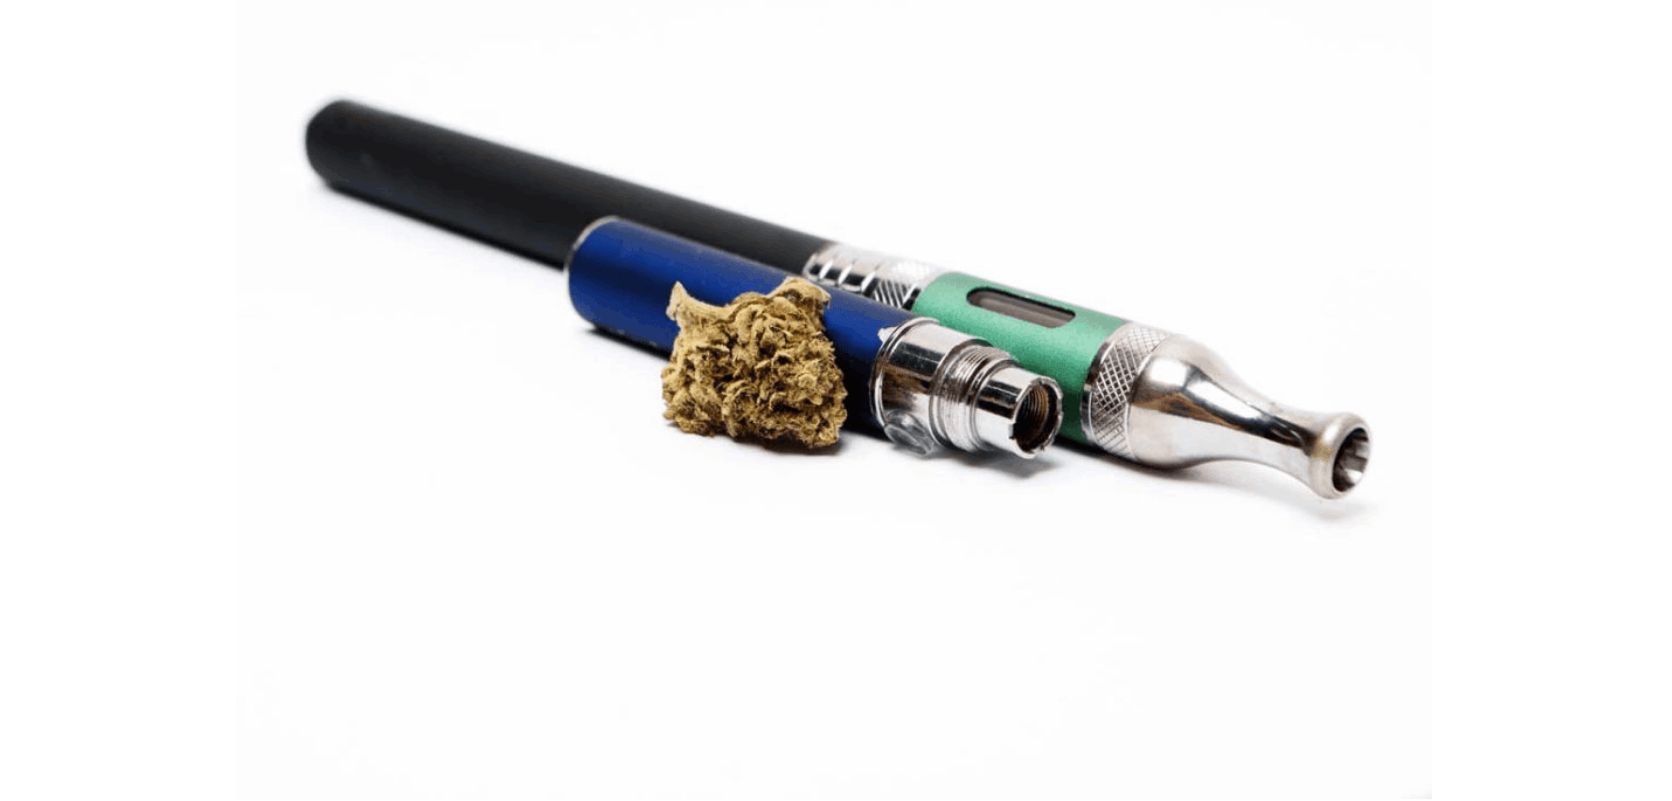 Before you learn how to use a weed pen, familiarize yourself with the types of vape pens. There are two main kinds of vape pens: 